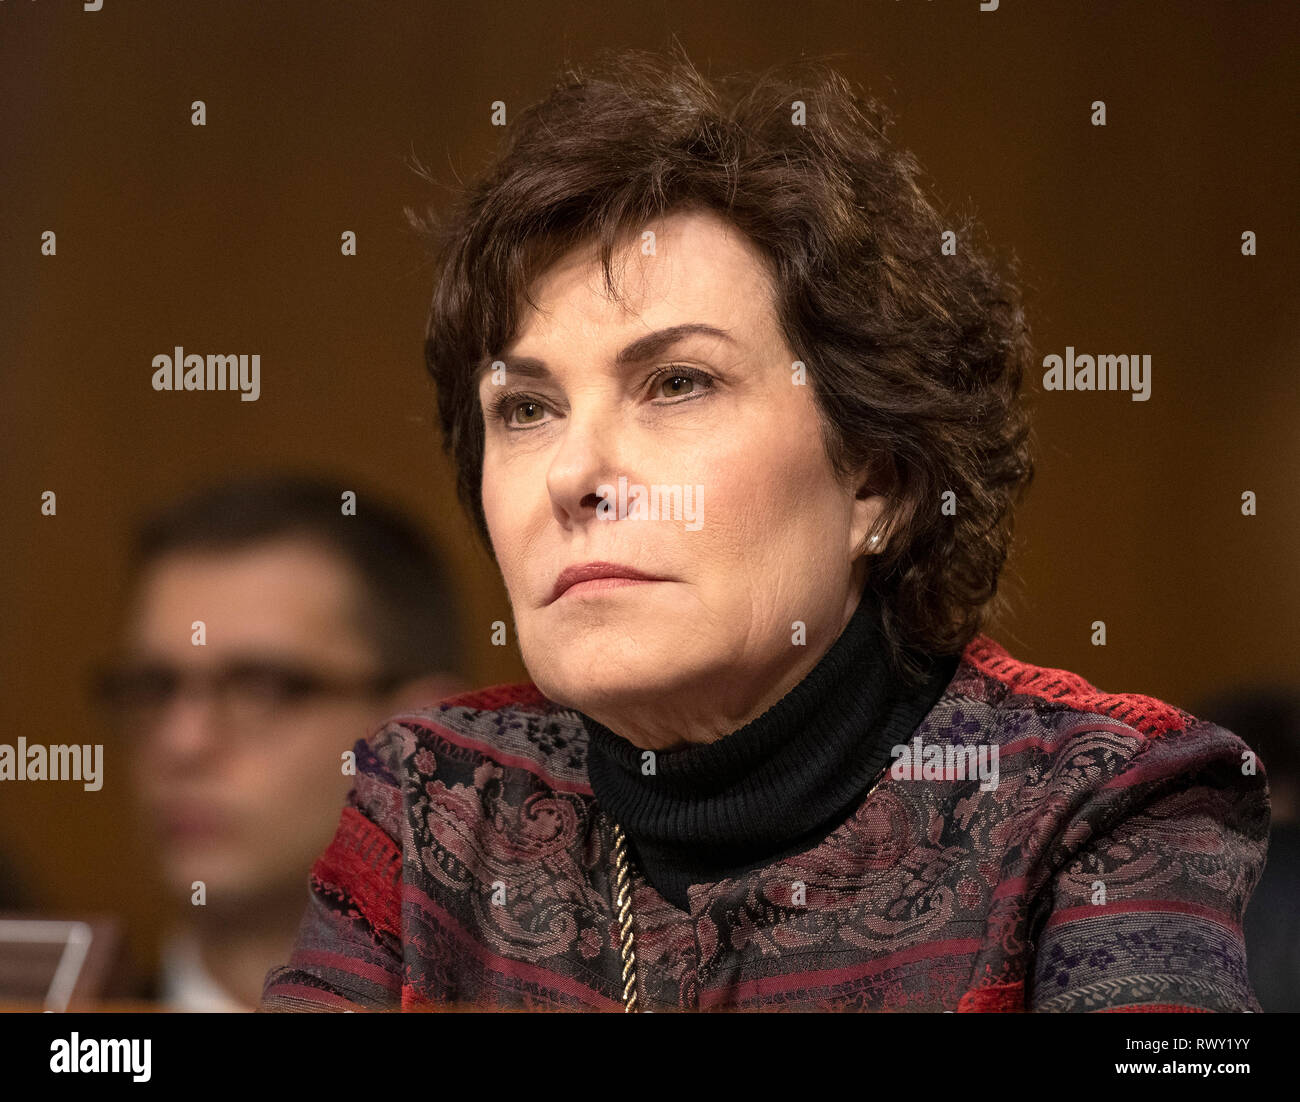 Washington, United States Of America. 07th Mar, 2019. United States Senator Jacky Rosen (Democrat of Nevada) listens to the testimony before the US Senate Committee on Homeland Security and Governmental Affairs Permanent Subcommittee on Investigations during a hearing on 'Examining Private Sector Data Breaches' on Capitol Hill in Washington, DC on Thursday, March 7, 2019. Credit: Ron Sachs/CNP | usage worldwide Credit: dpa/Alamy Live News Stock Photo